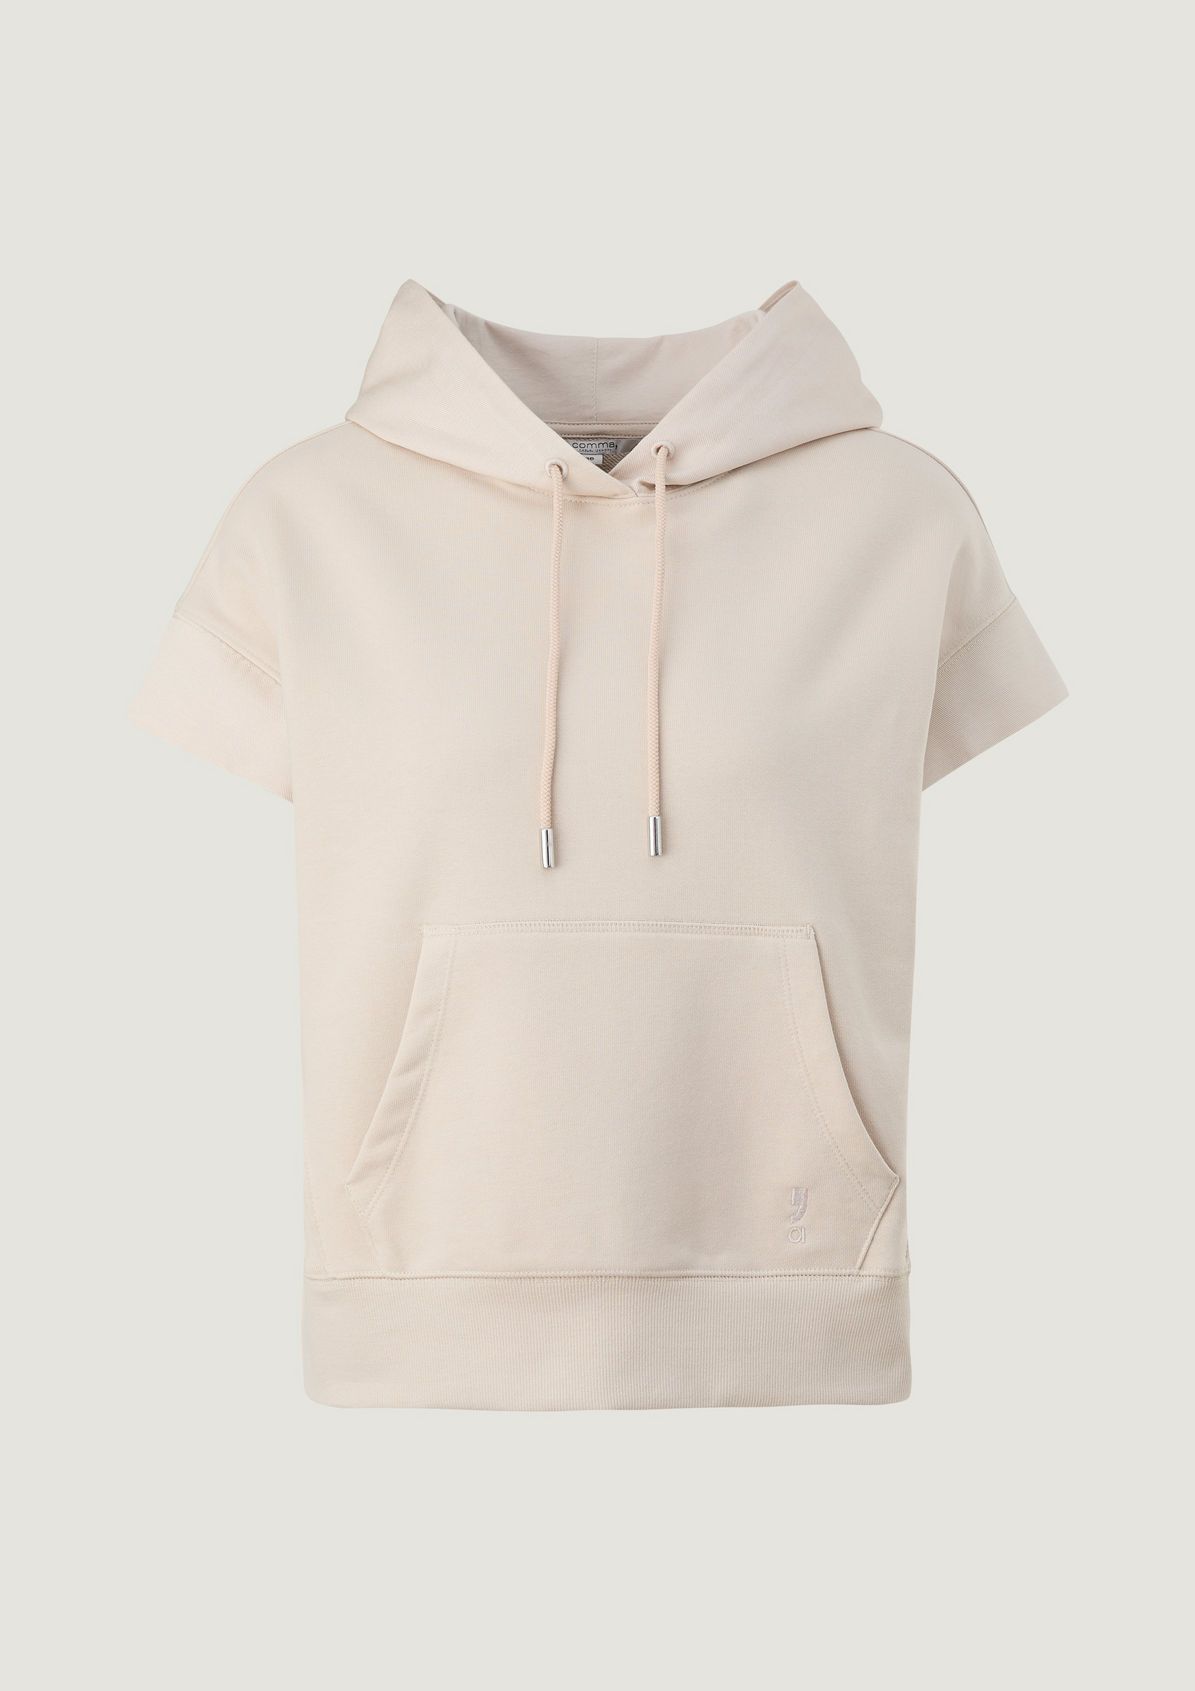 Sweatshirt with short sleeves from comma